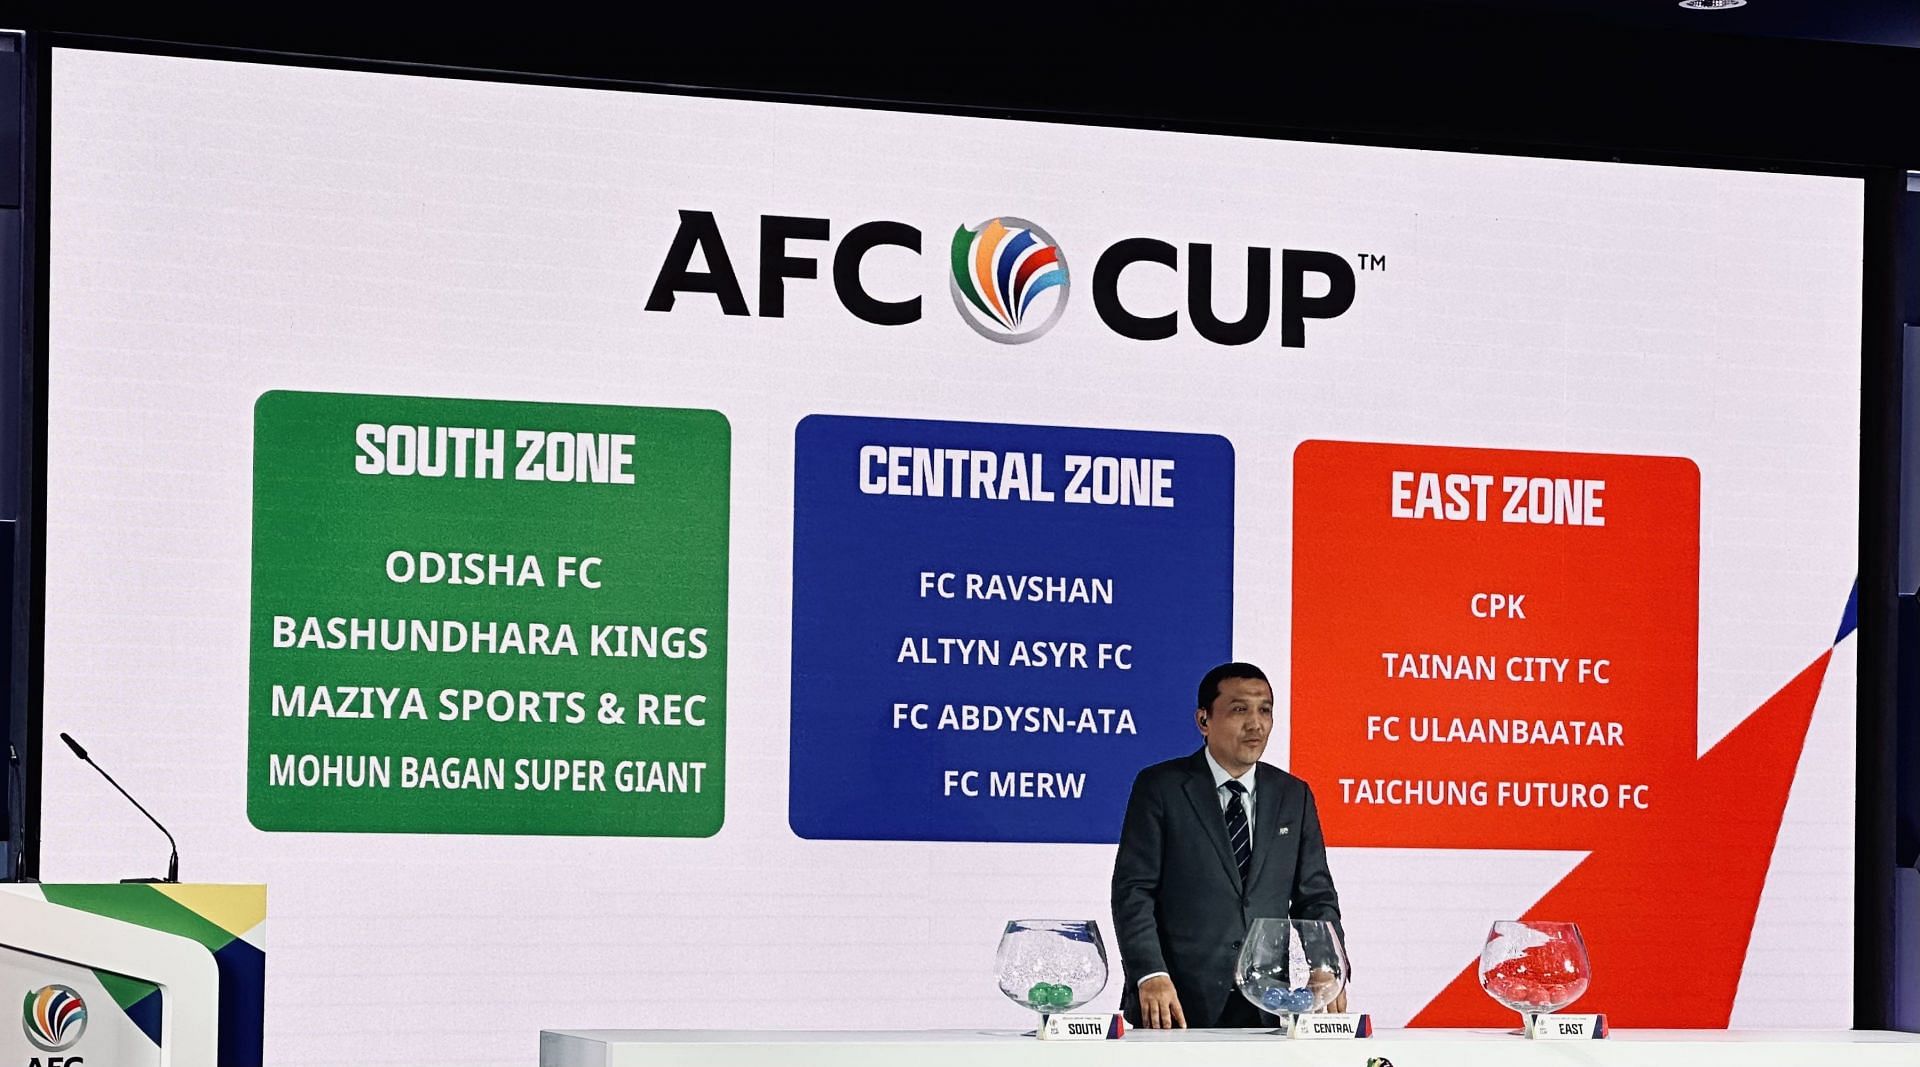 Both Odisha FC and Mohun Bagan SG will be hoping to cross the group-stage barrier in the AFC Cup.